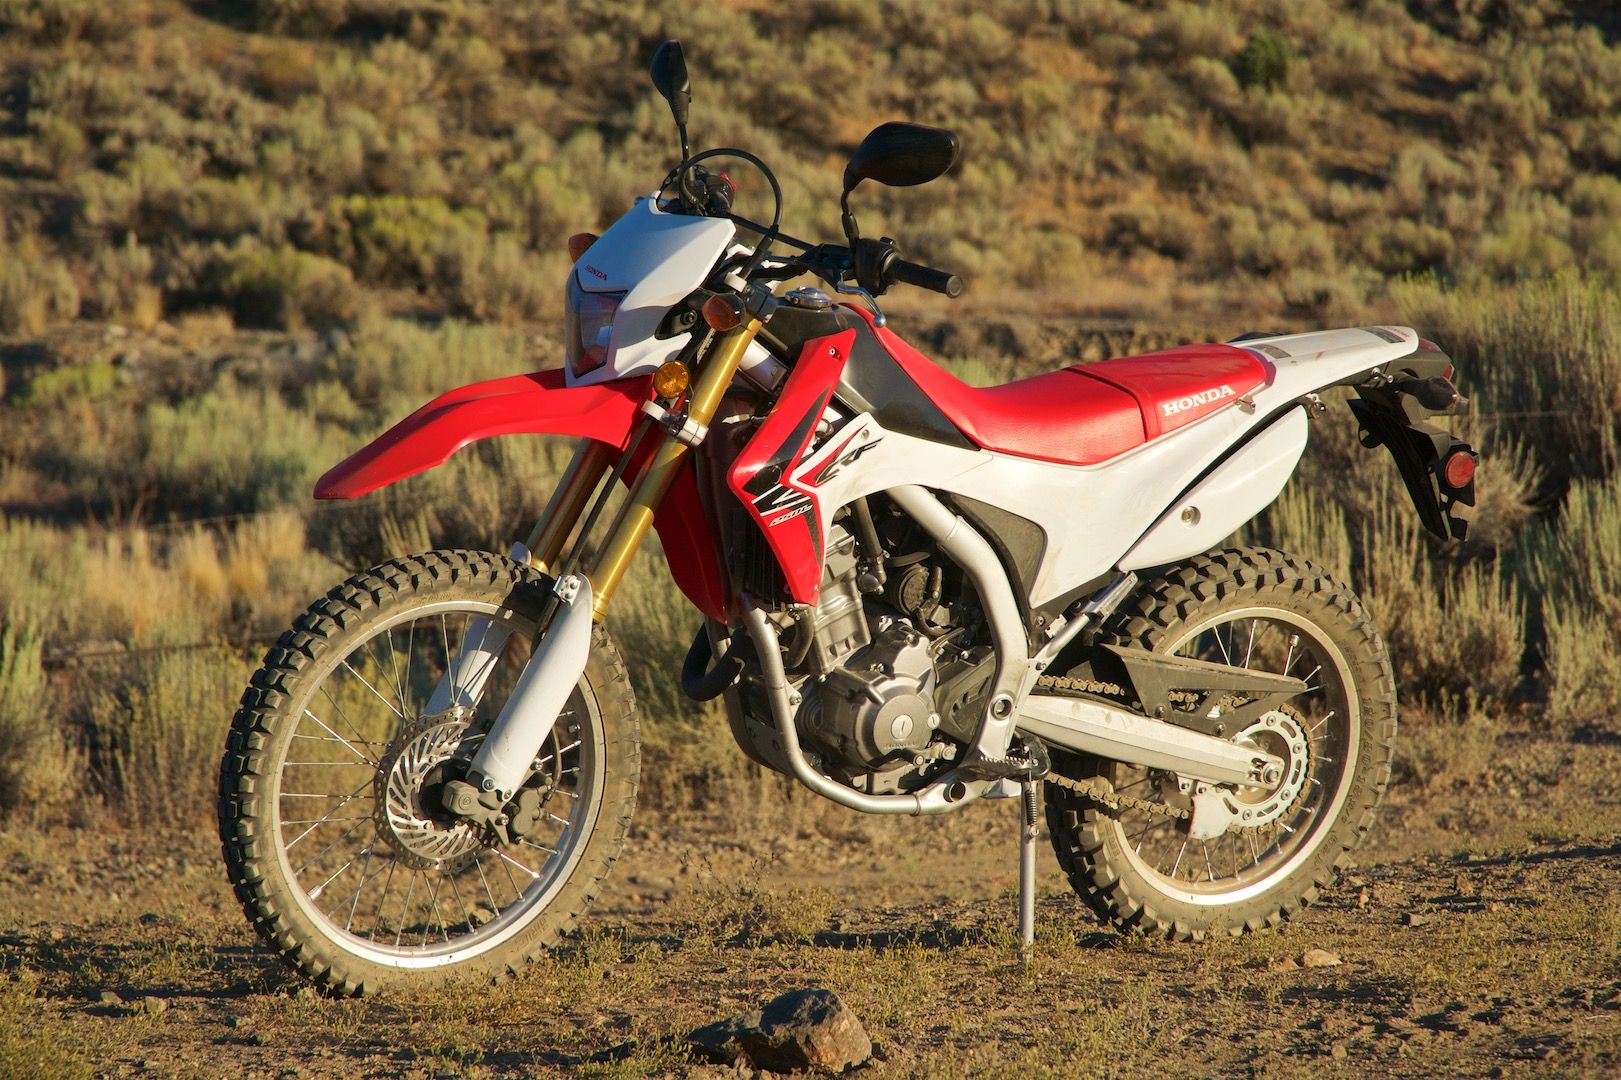 Honda CRF250L parked on a dirt road